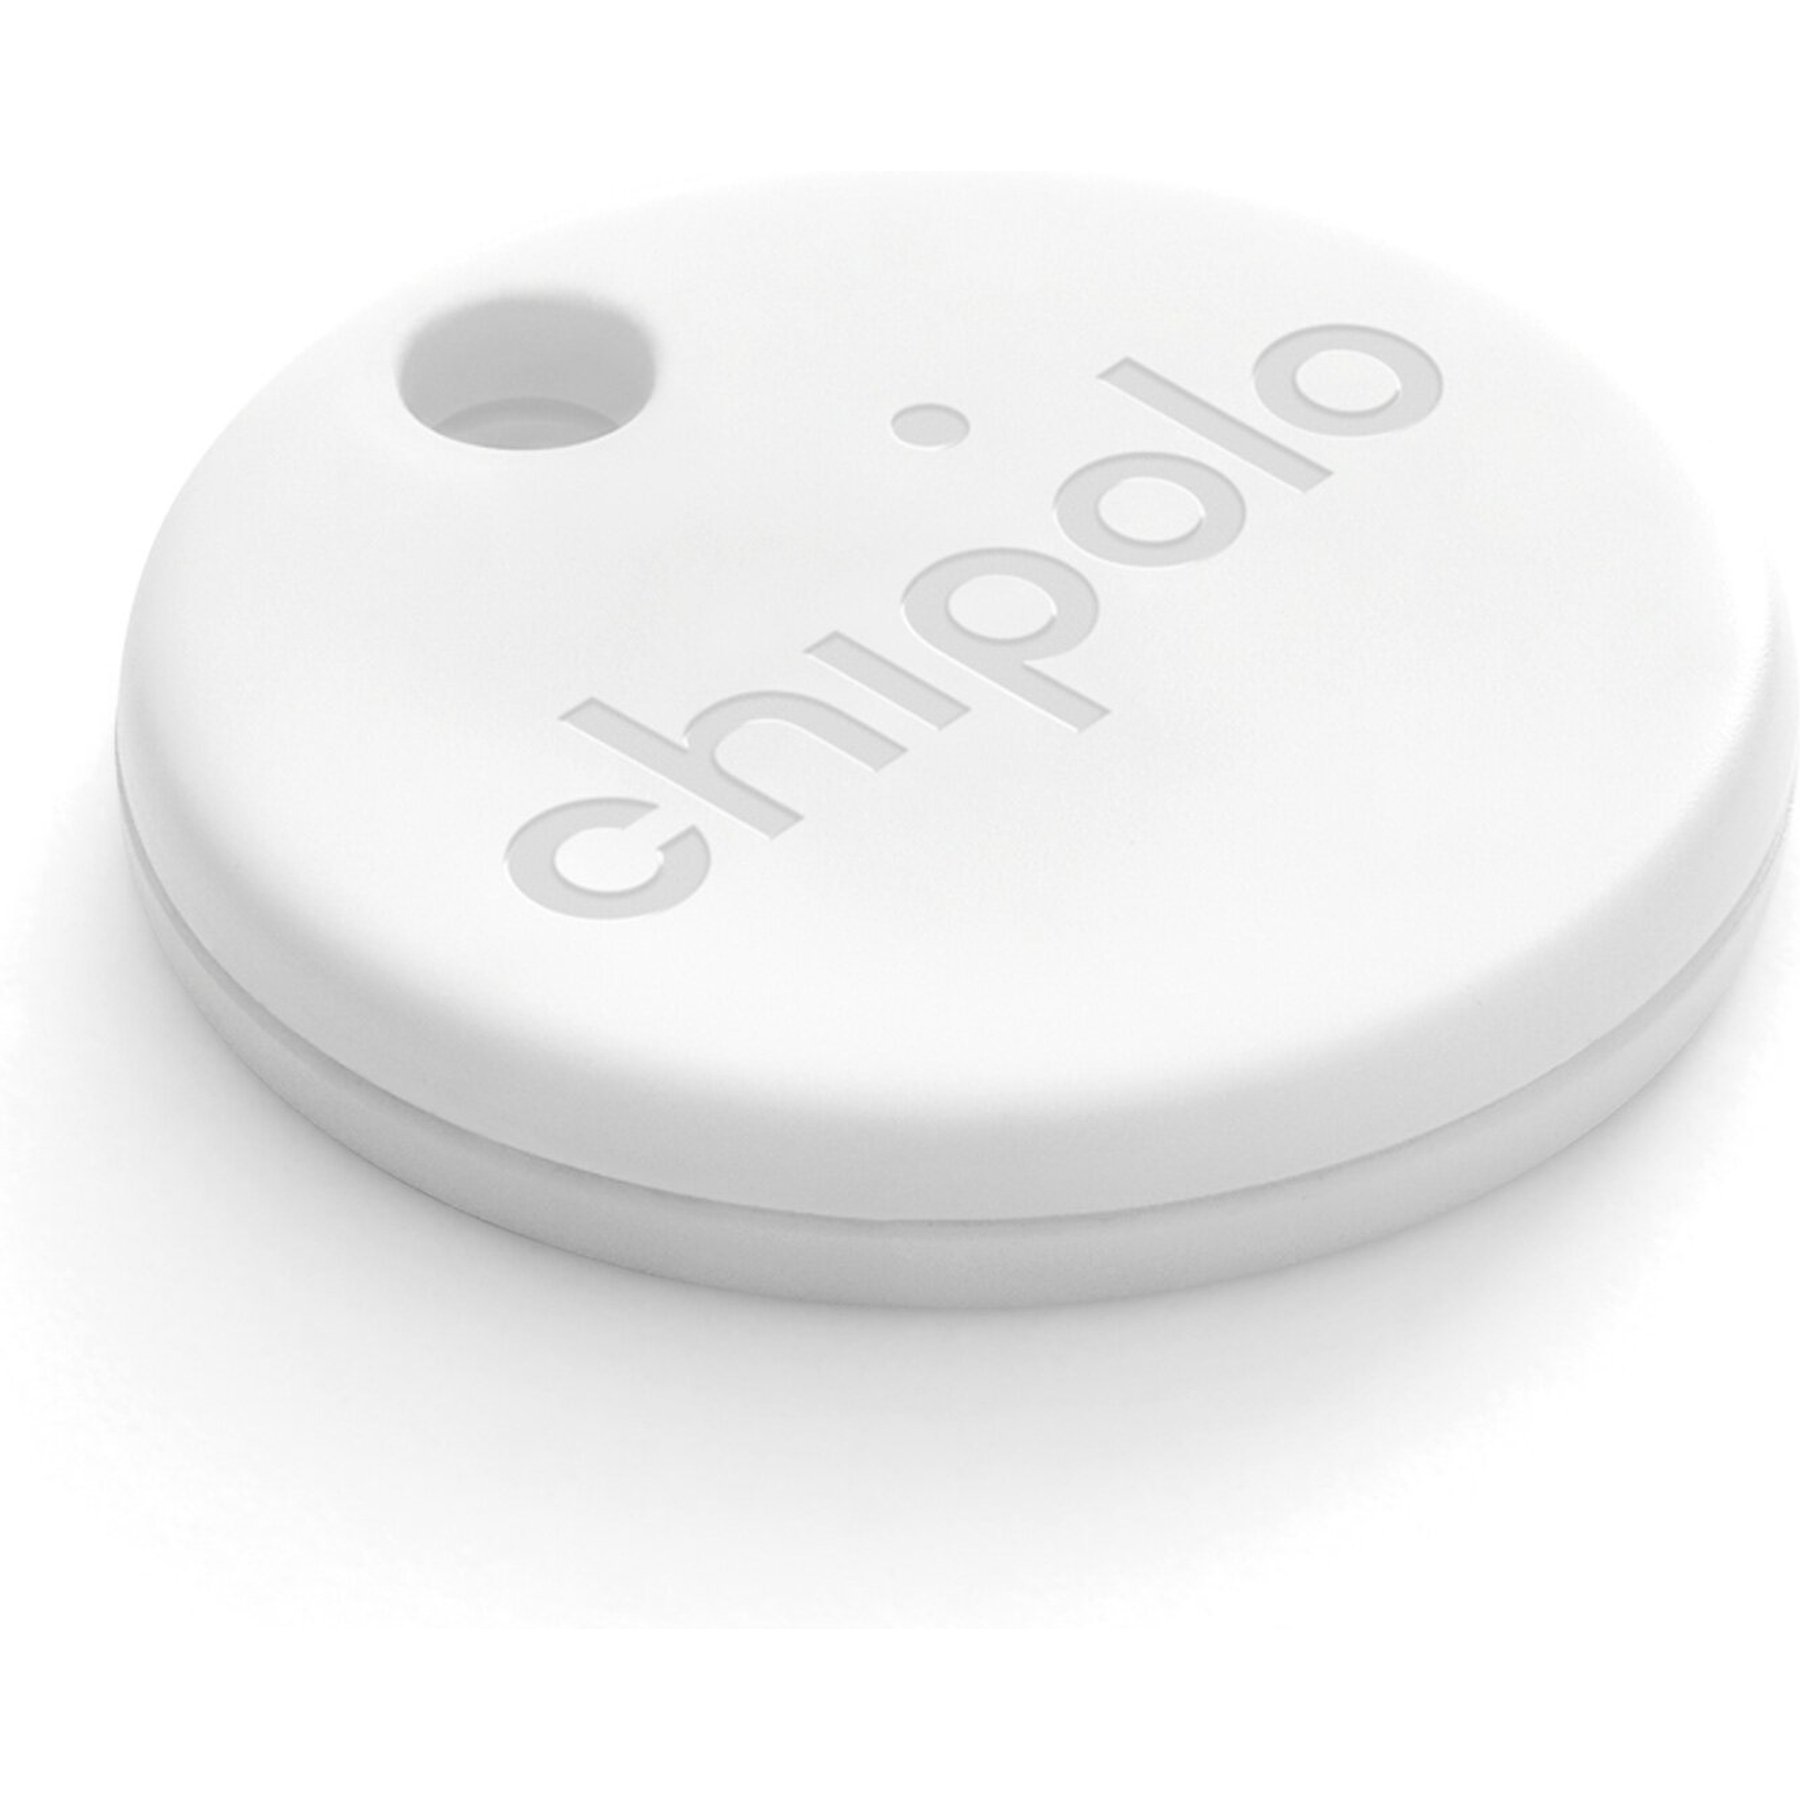 The Chipolo One is an affordable smart tracker with premium